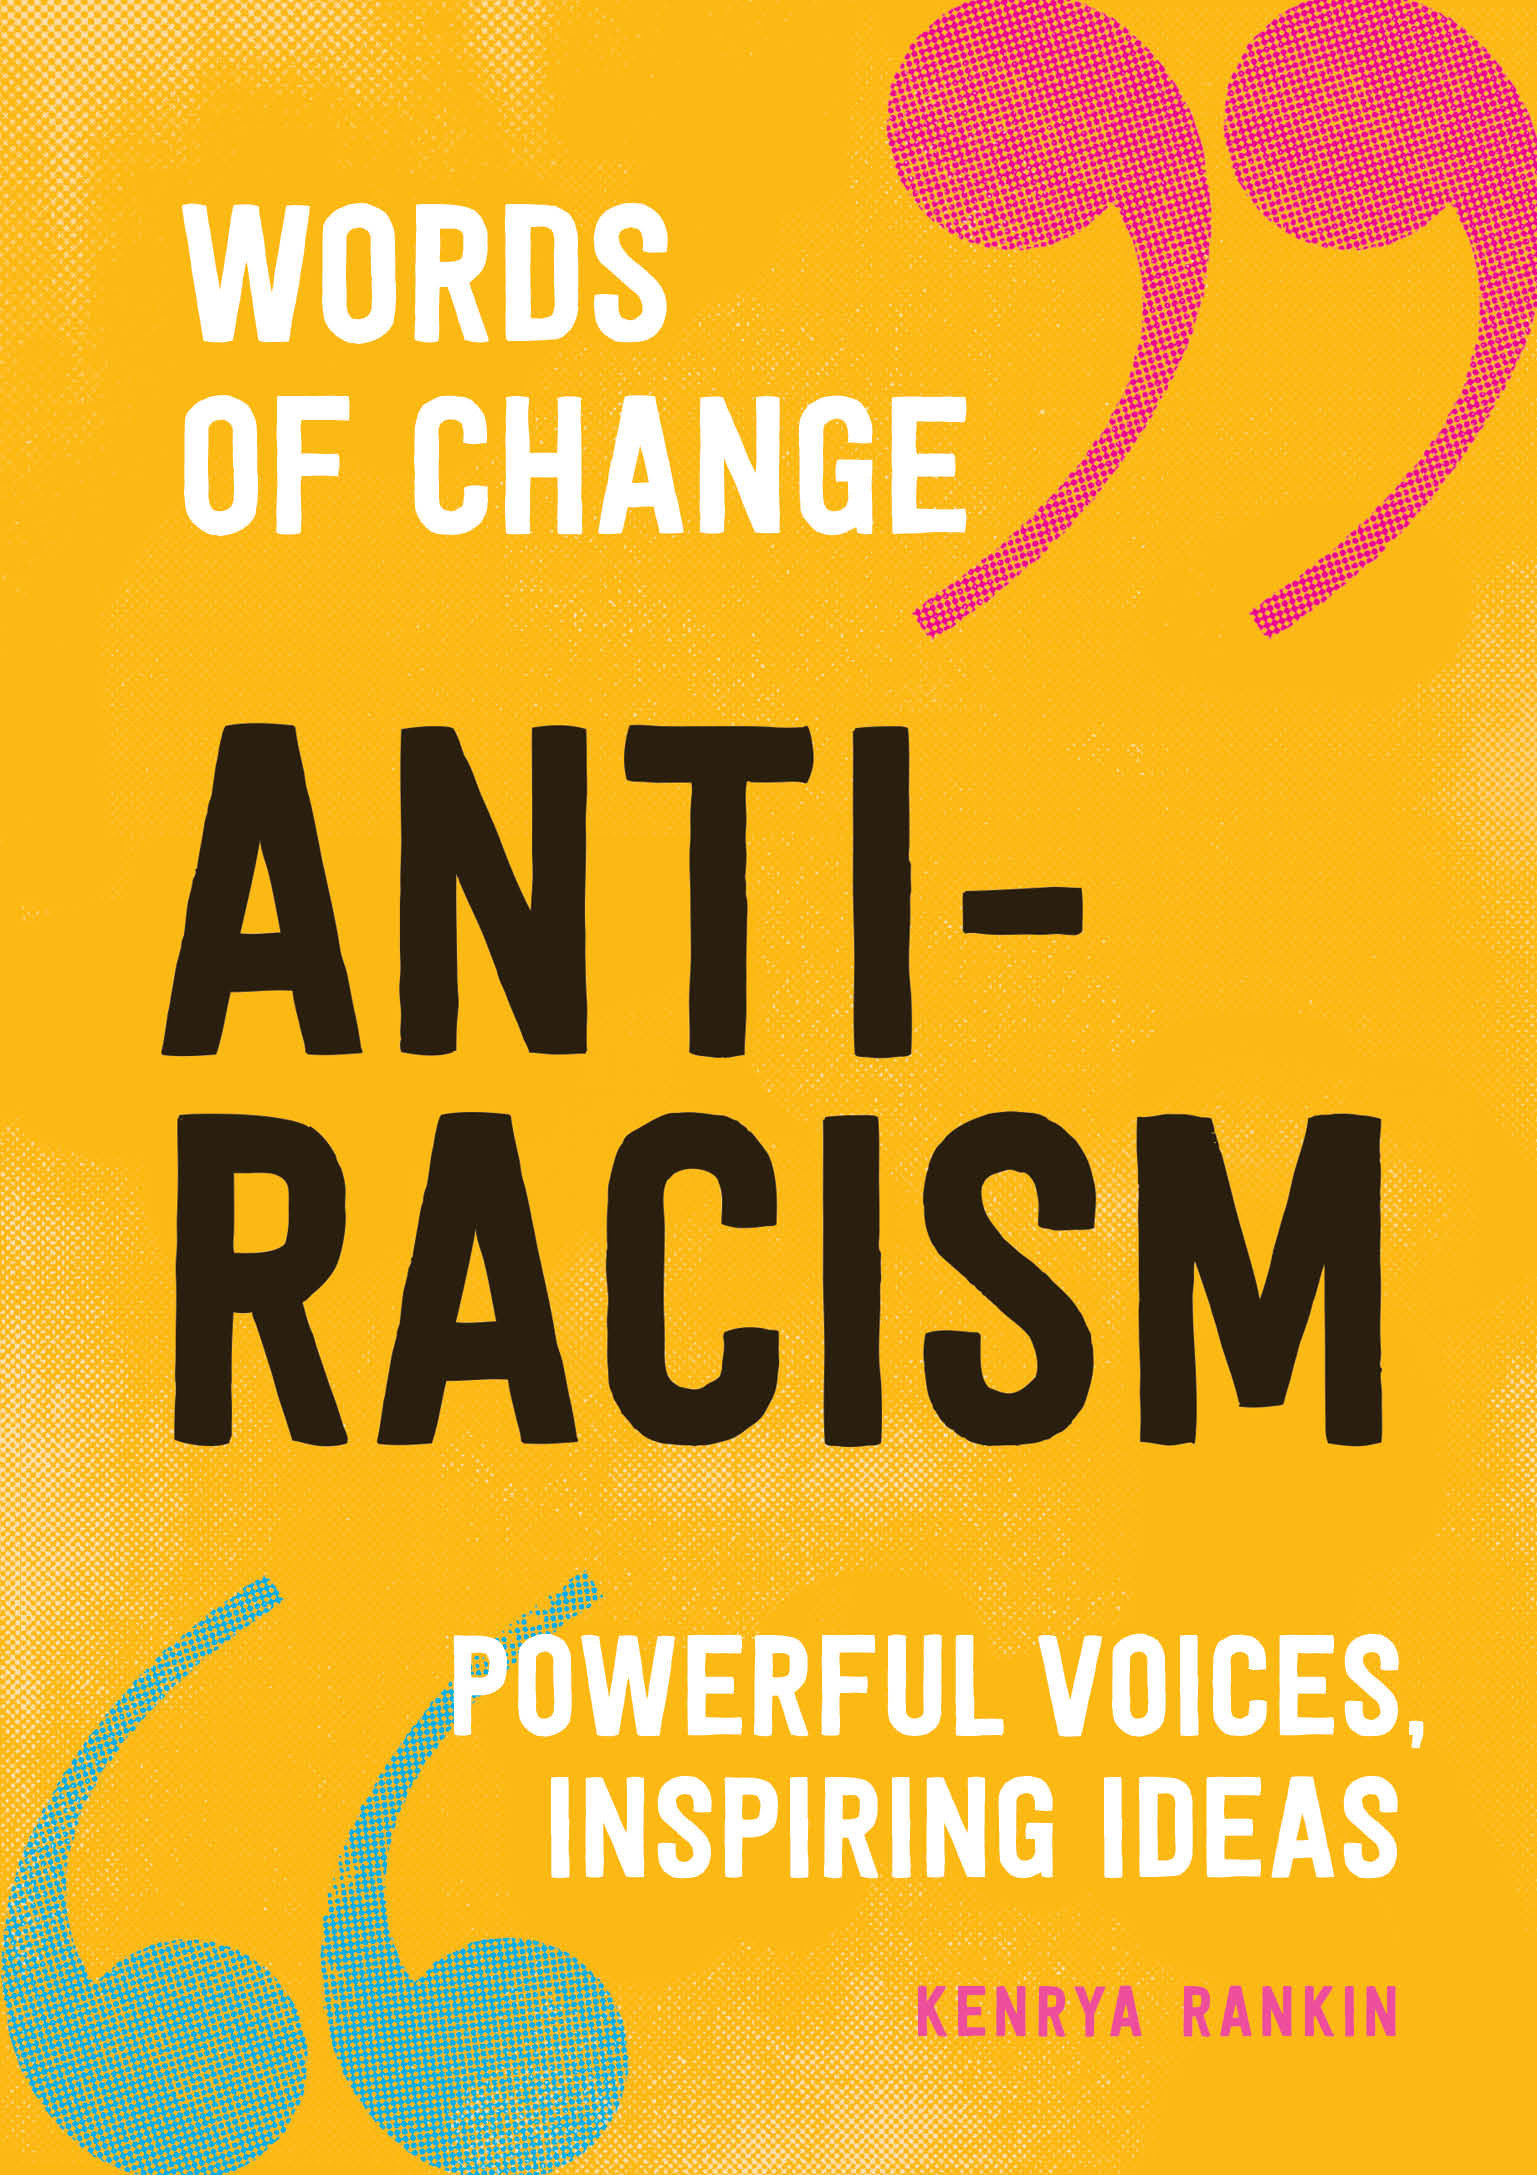 Anti-Racism (Words Of Change Series) (Hardcover Book)